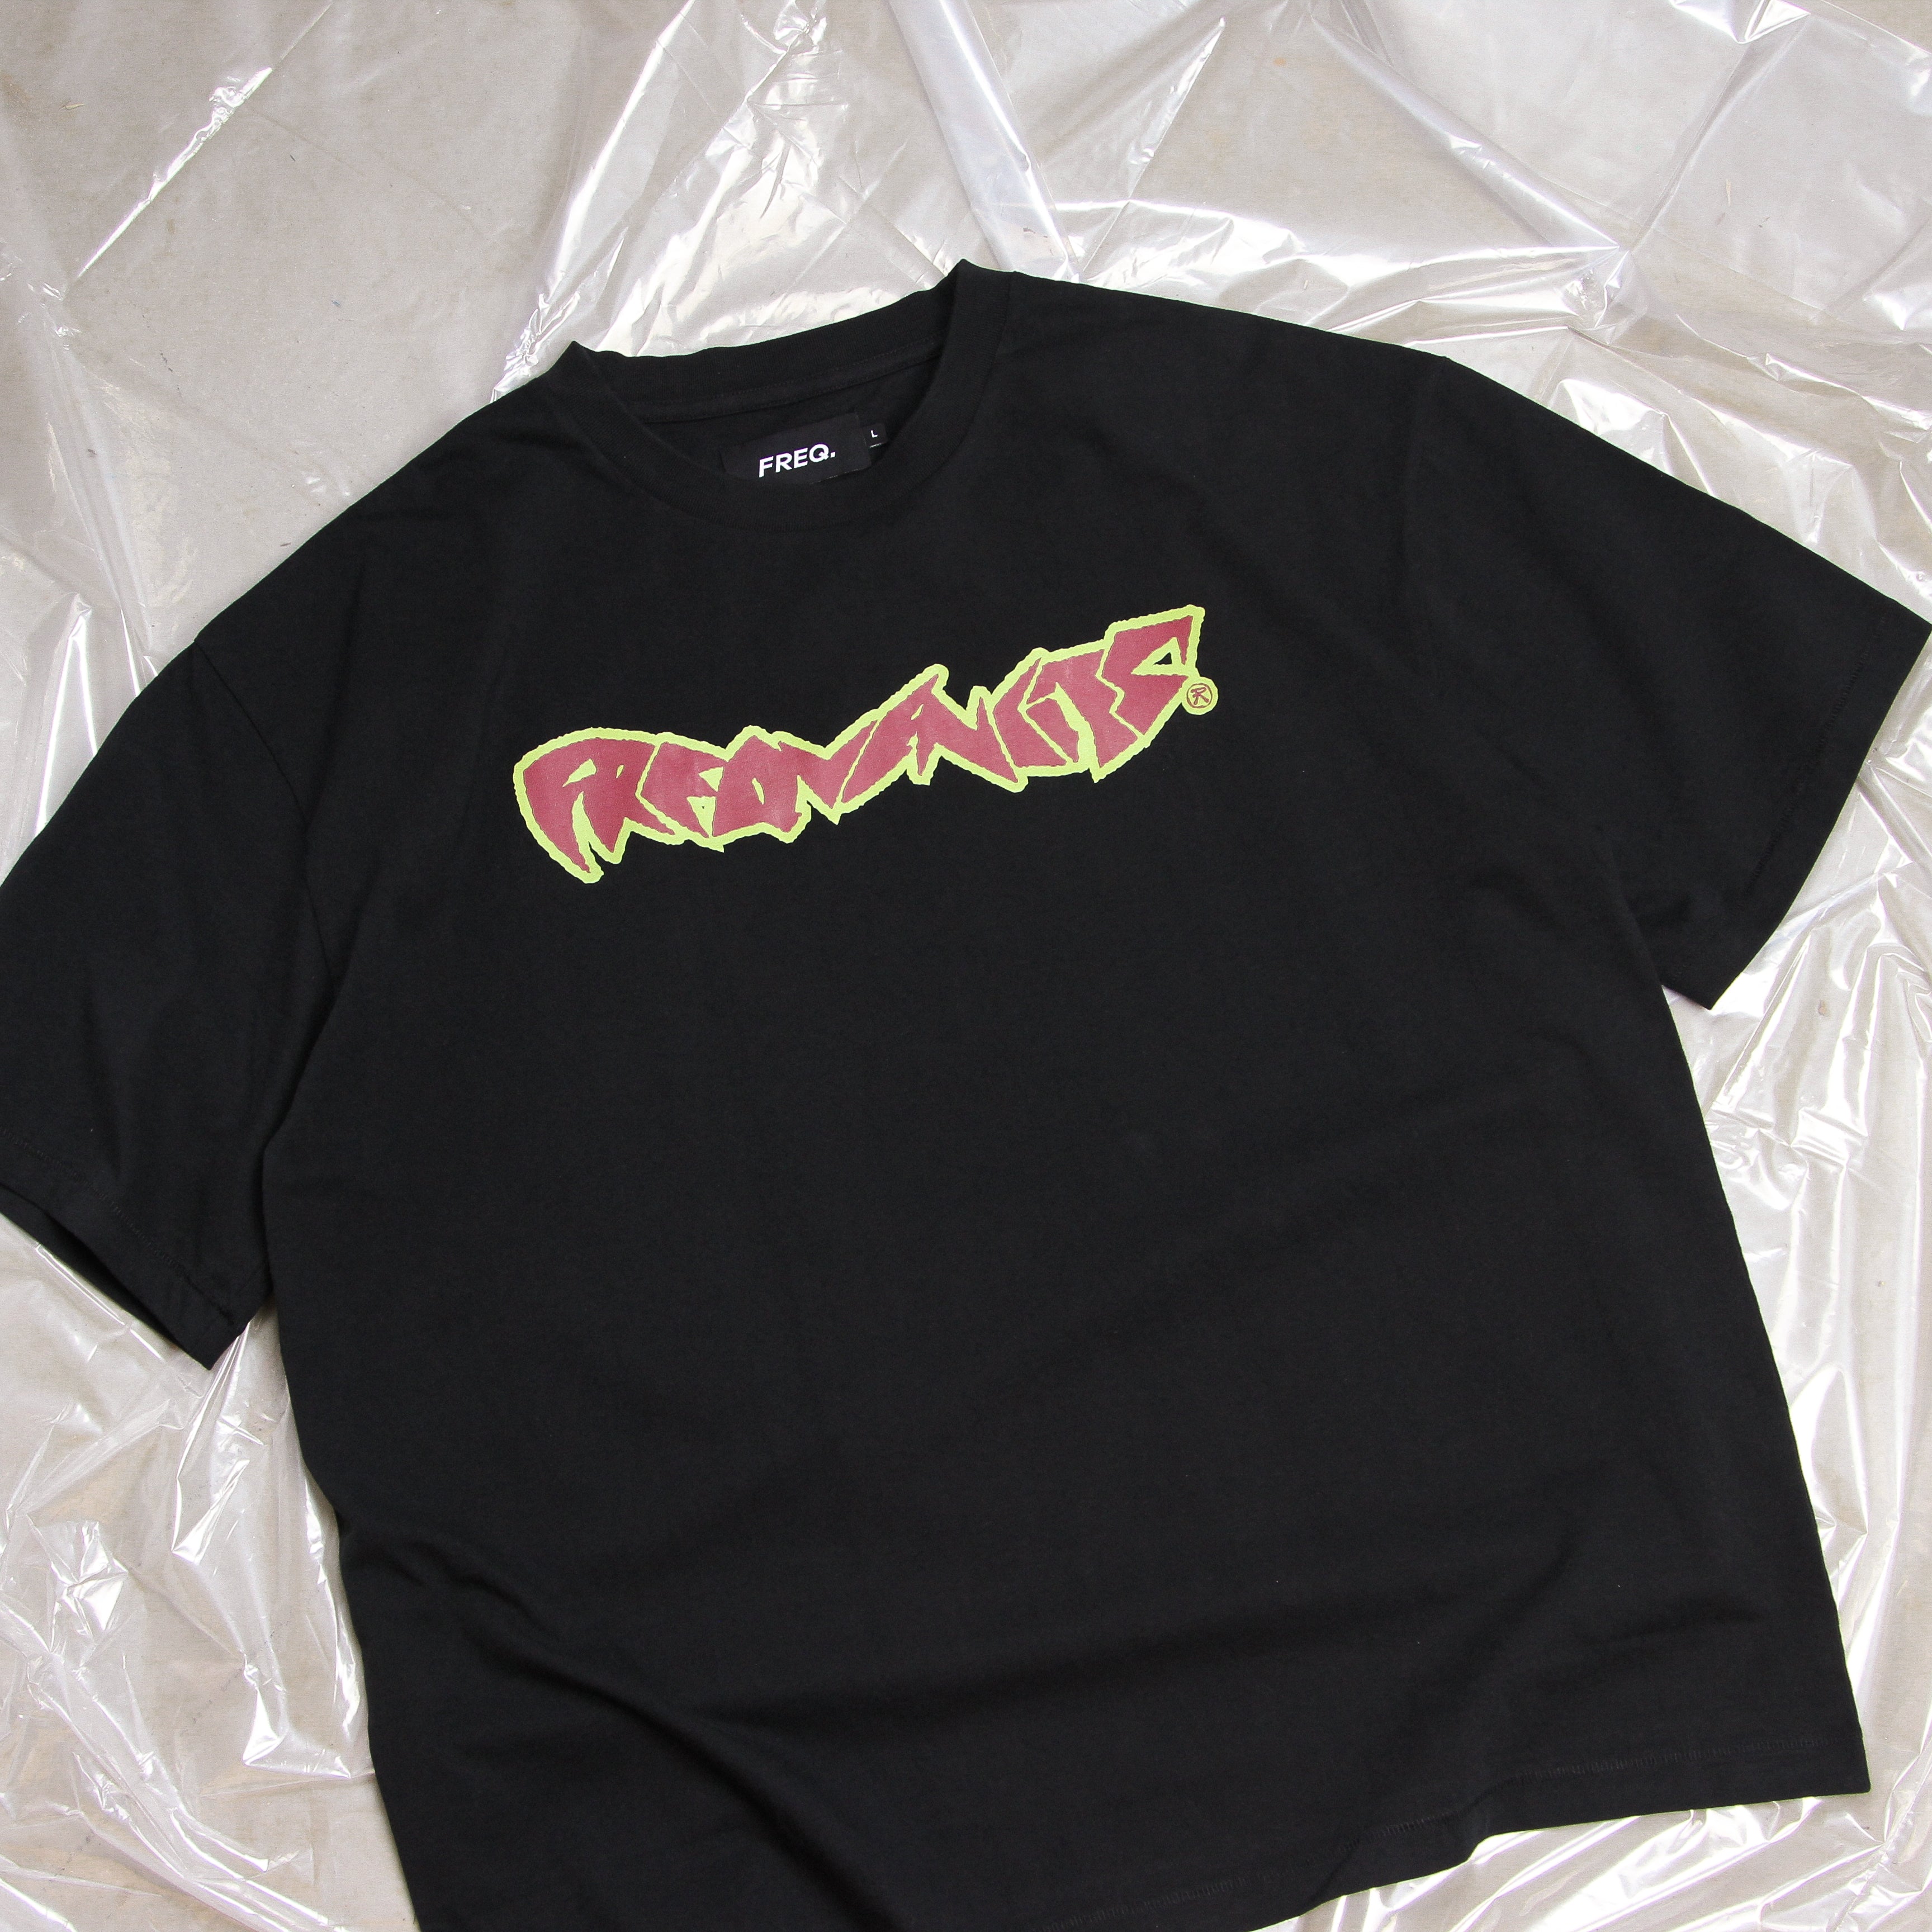 FRACTURE TEE - BLACK / RED